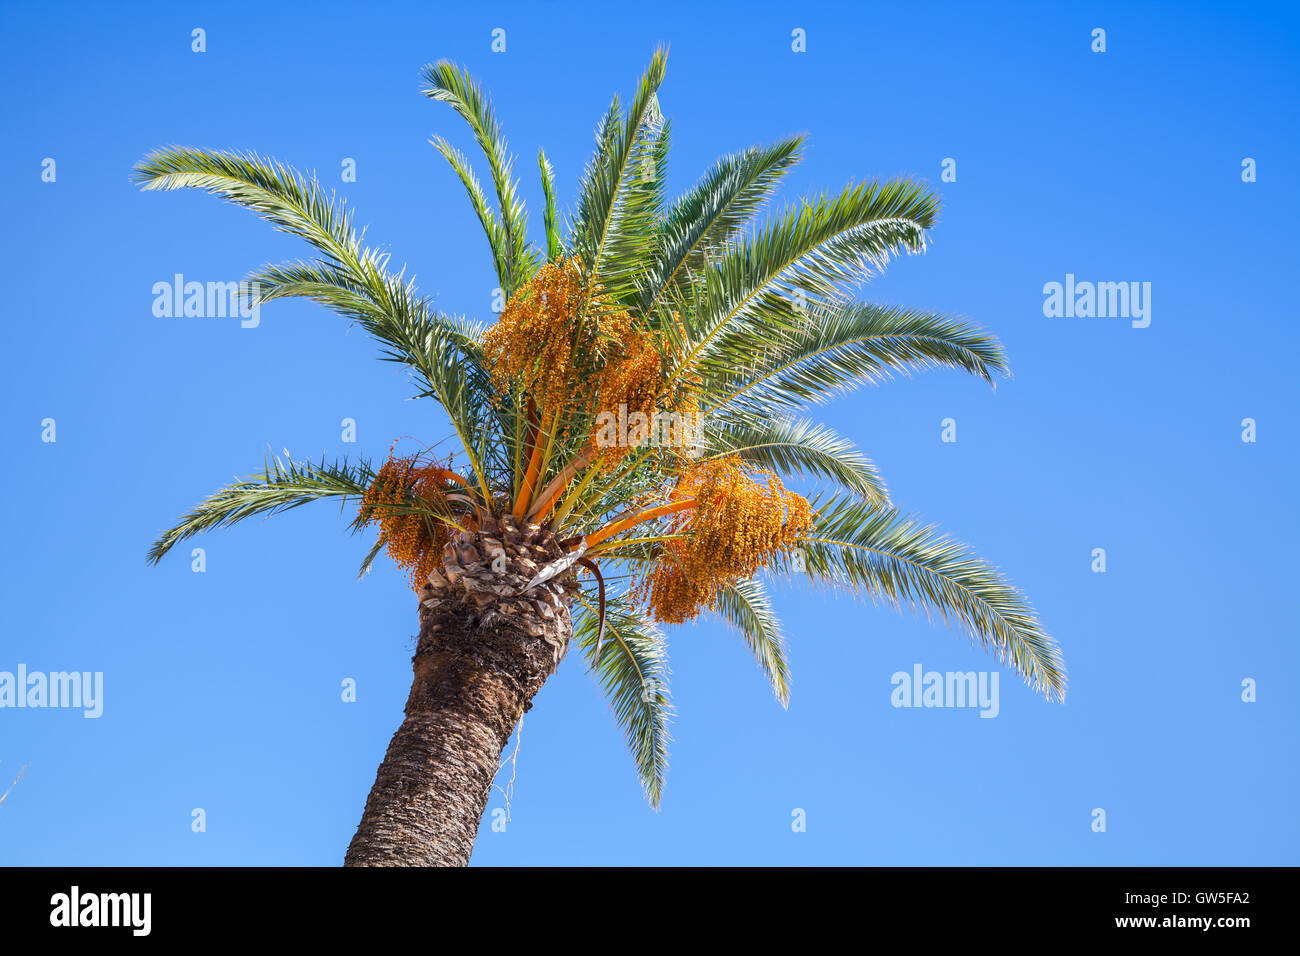 Date palm tree over clear blue sky background Stock Photo